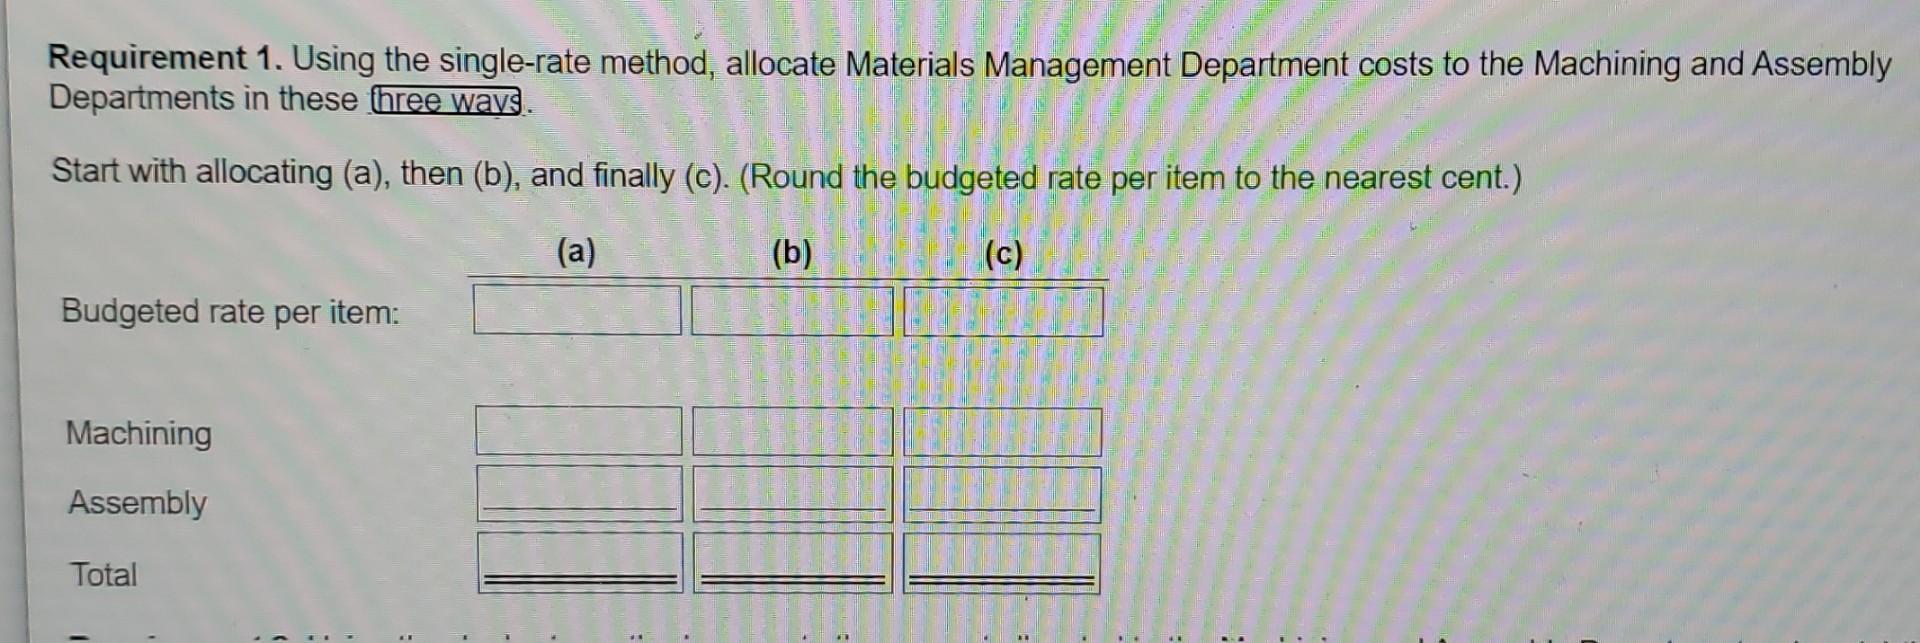 Requirement 1. Using the single-rate method, allocate Materials Management Department costs to the Machining and AssemblyDep